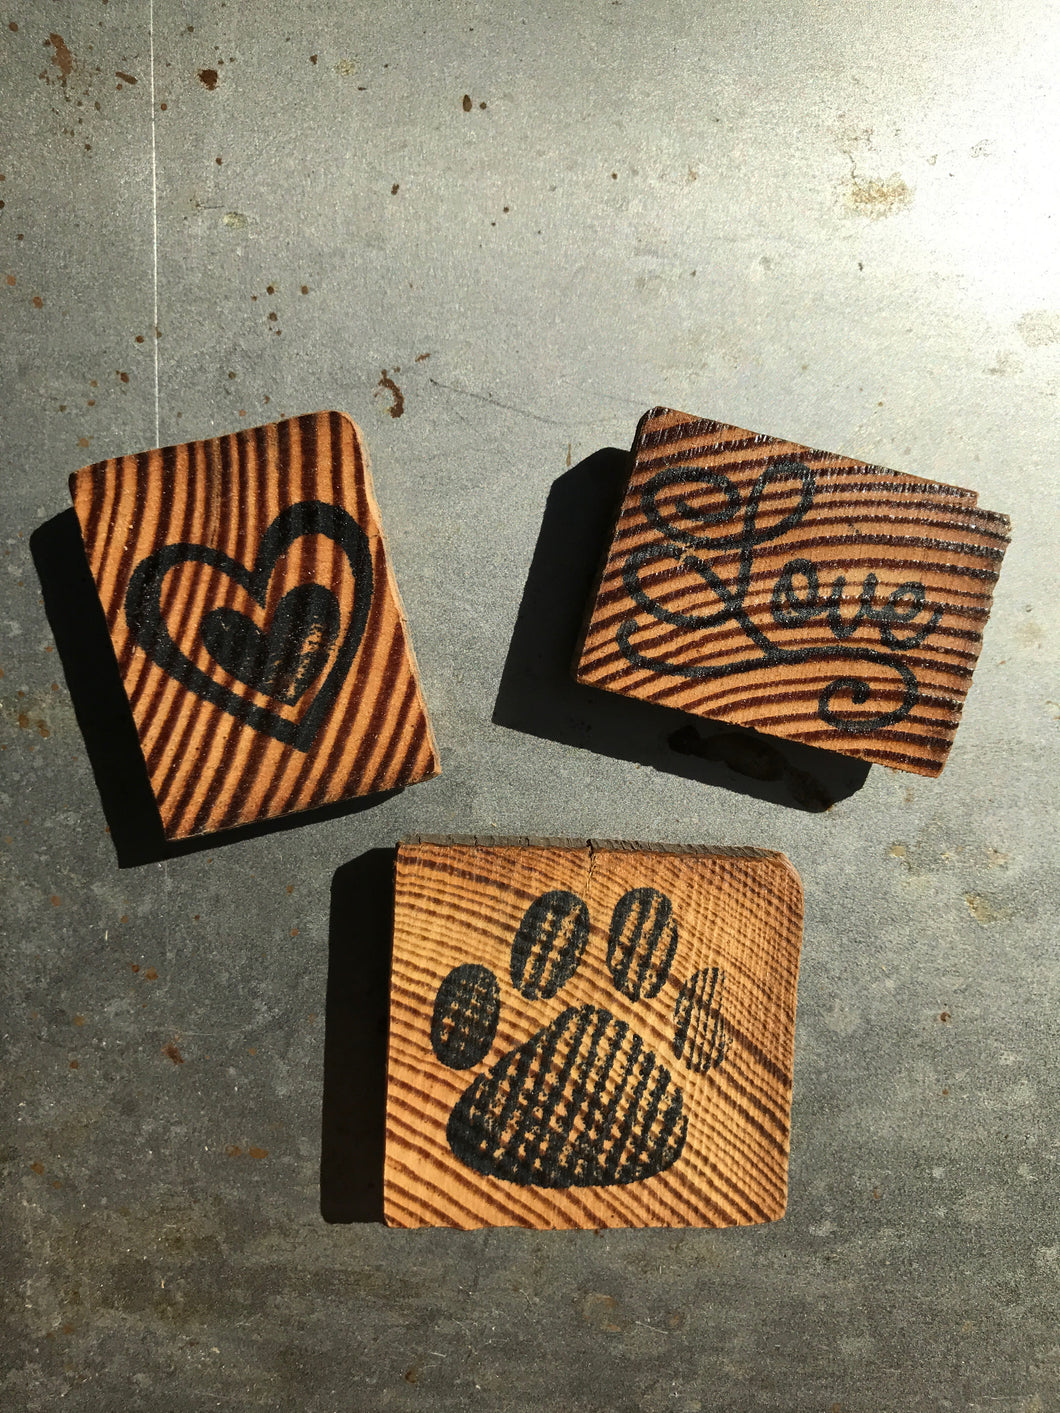 Dog Paw Print / Love / Heart (Set of 3) - Upcycled Hand-made Wood Magnets